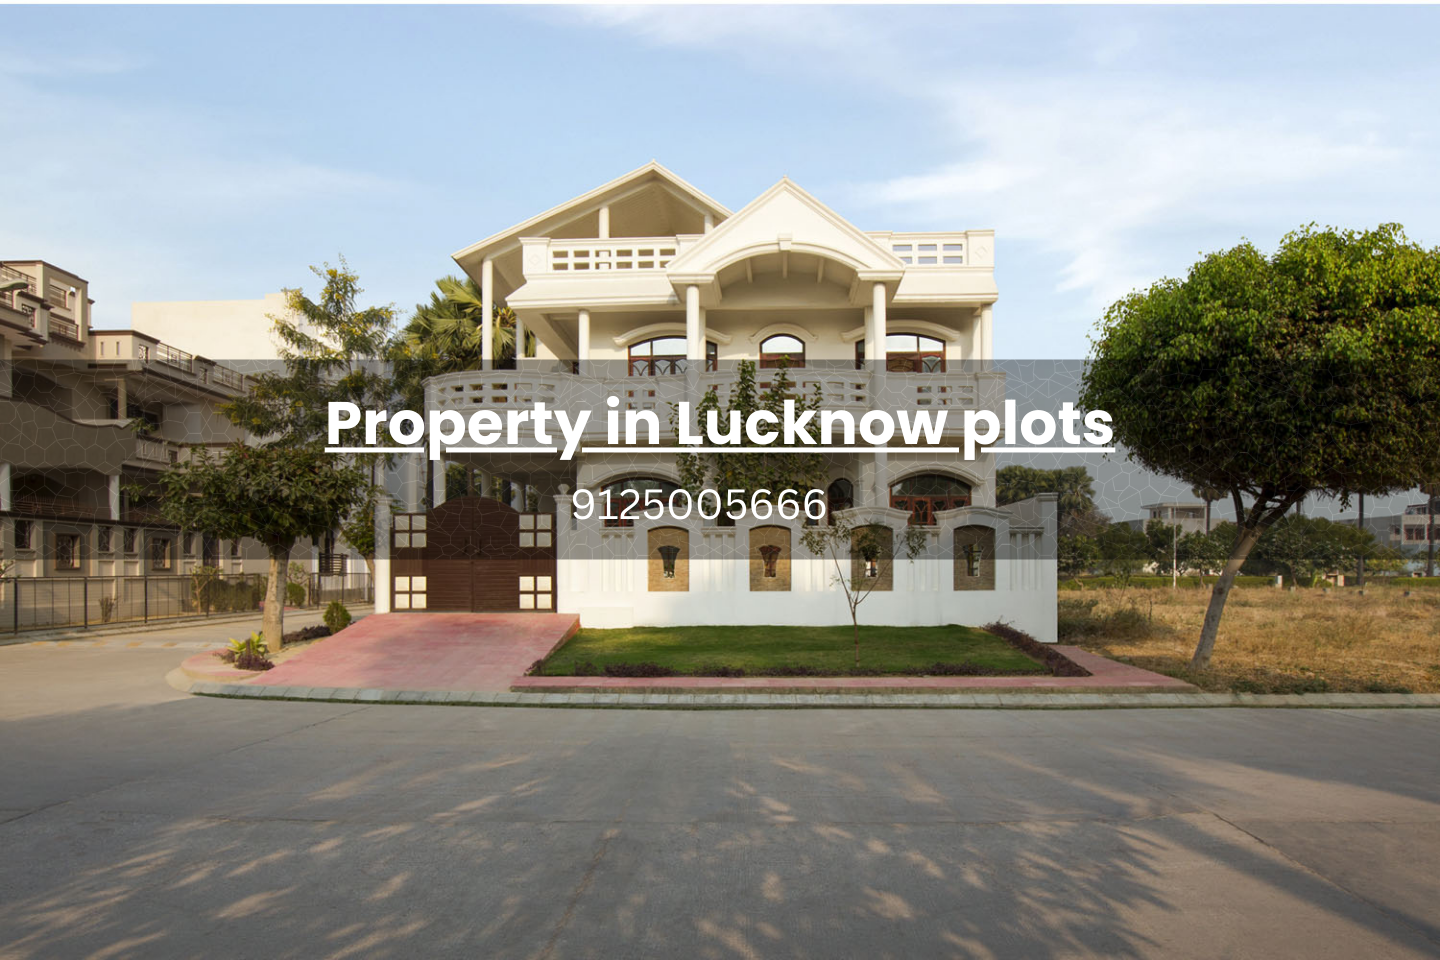 Property in Lucknow plots